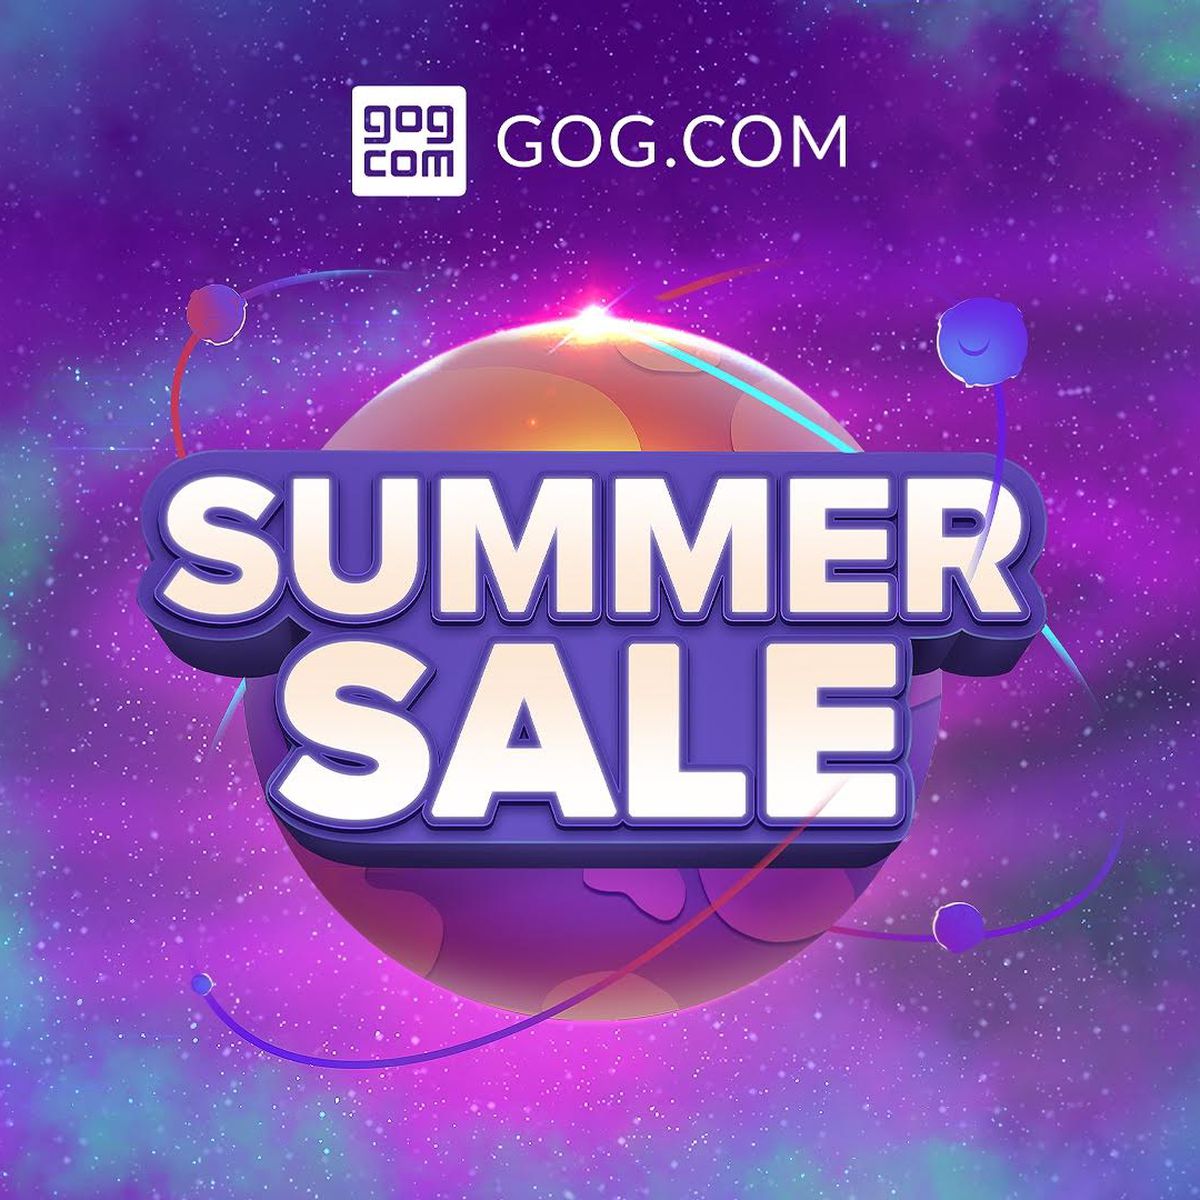 A promotional image for the GOG Summer Sale